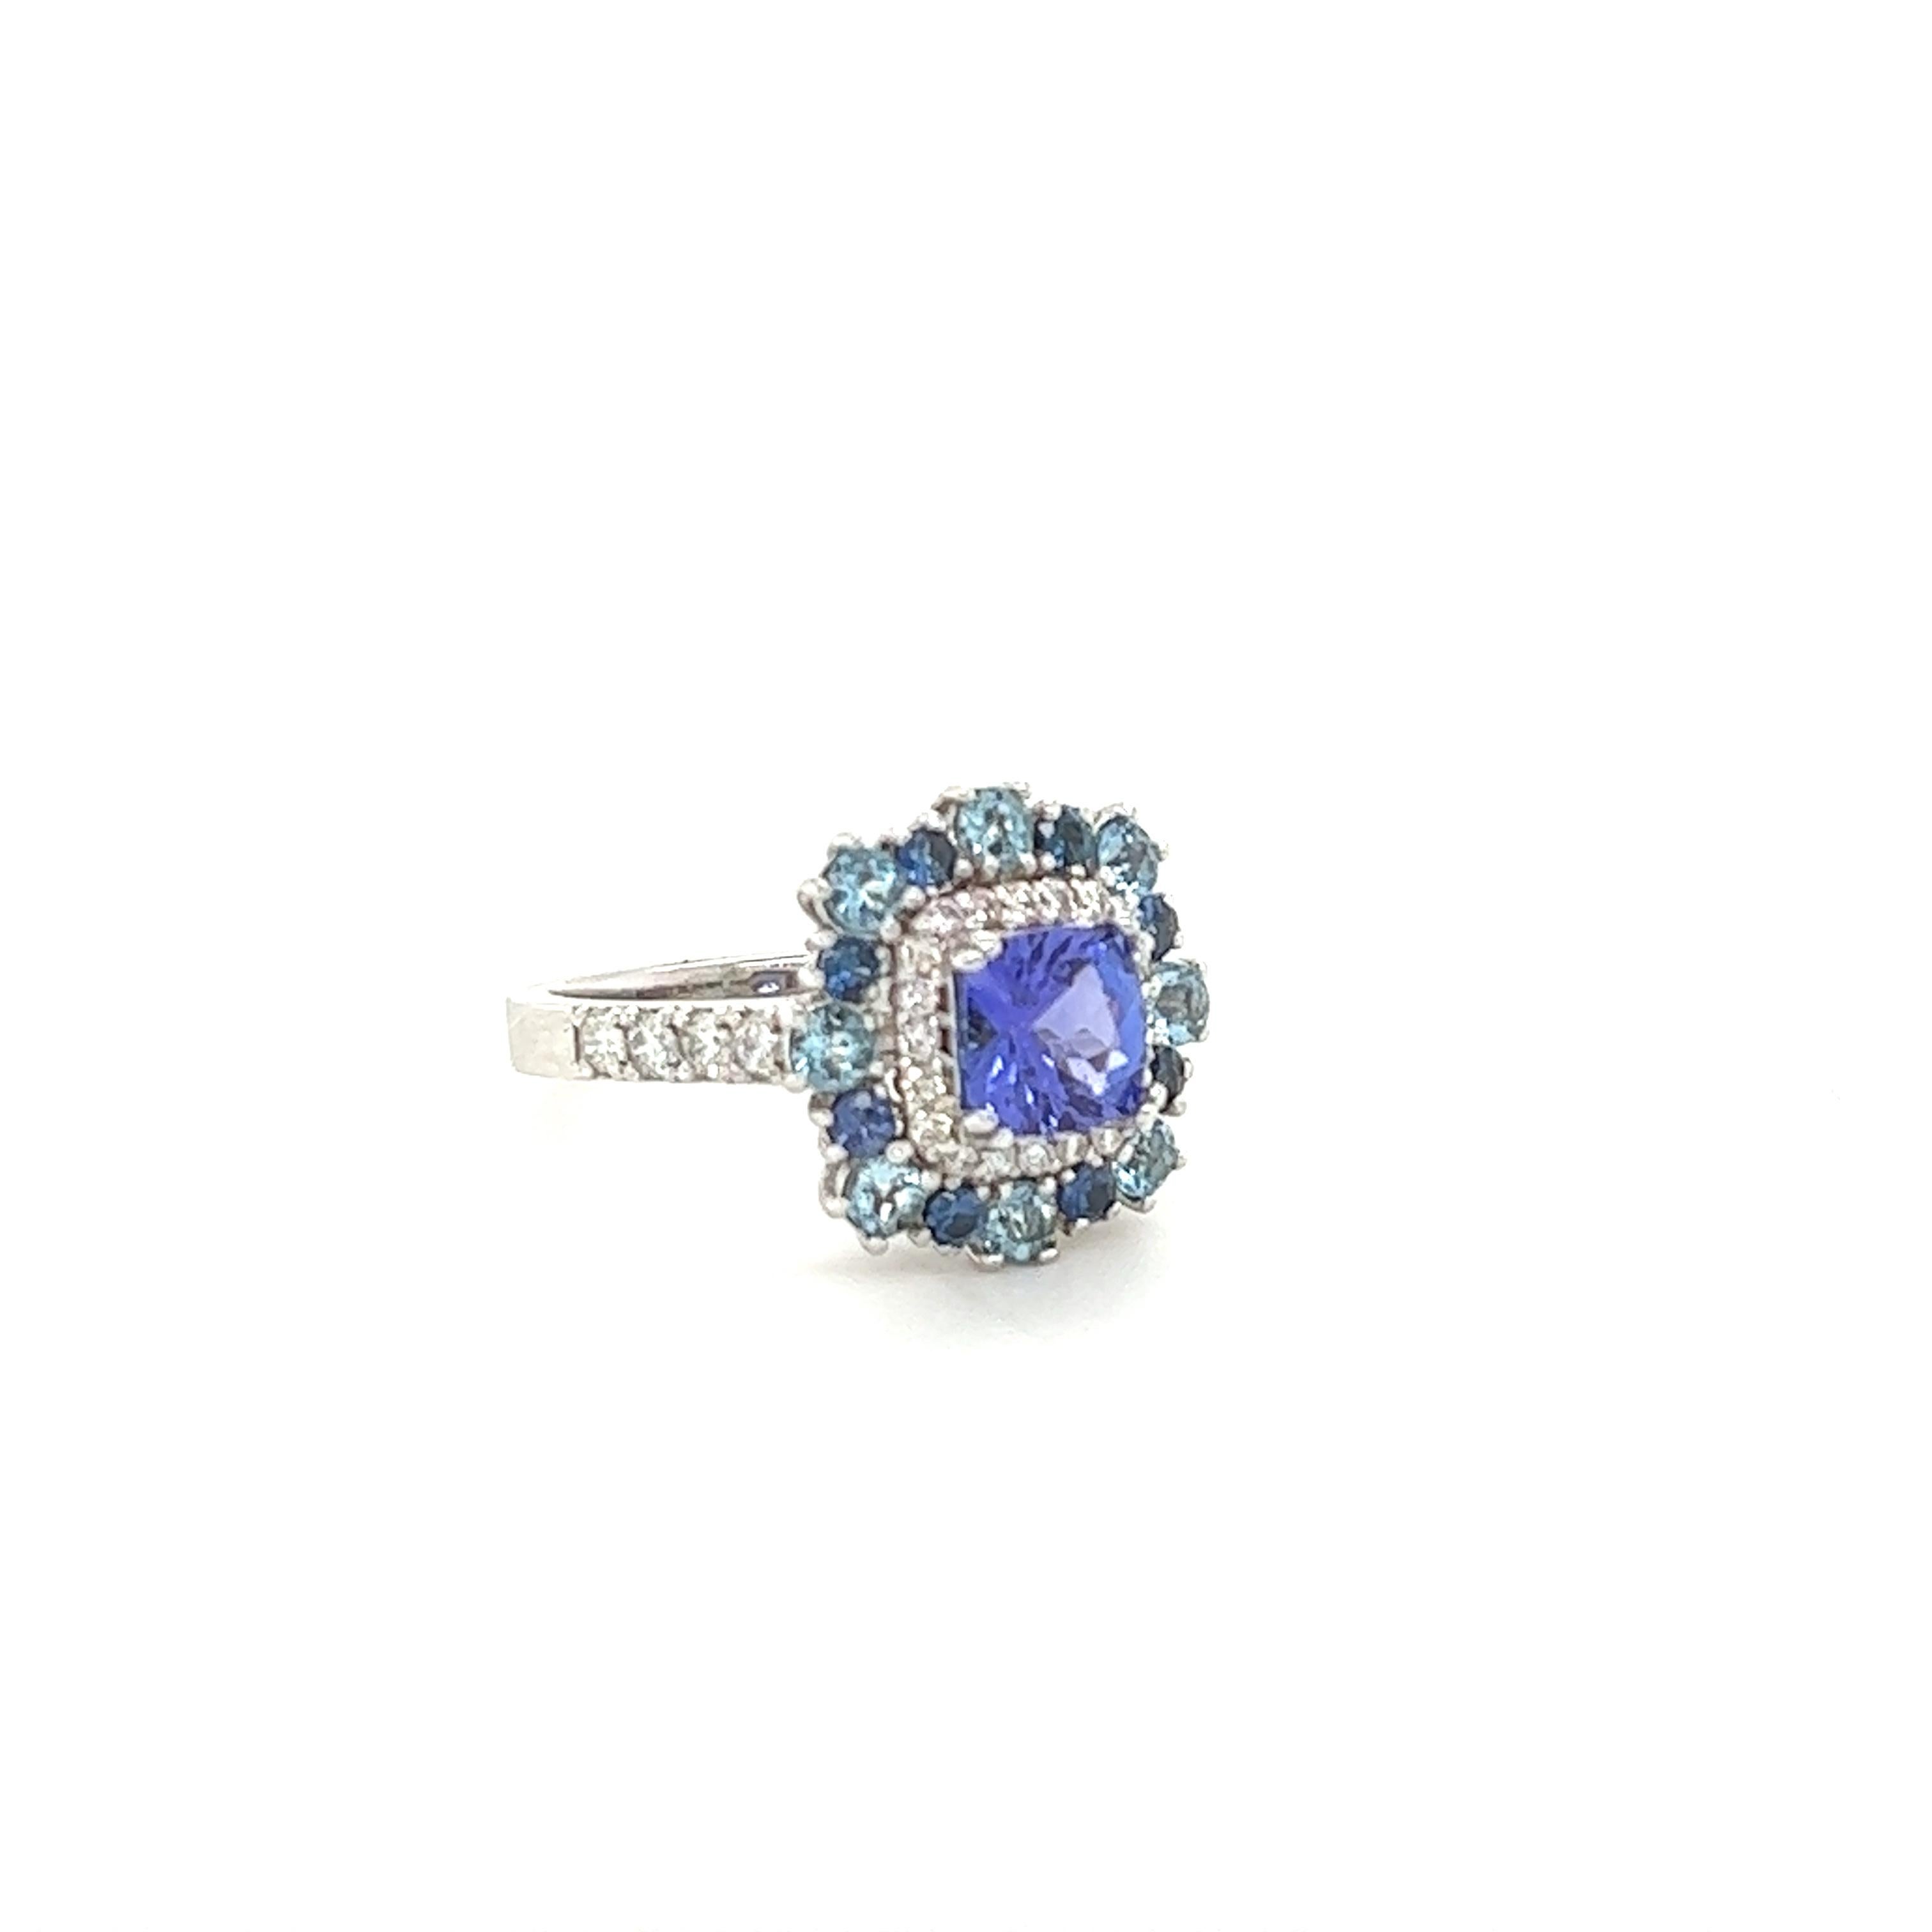 This beauty has a 1.15 Carat Natural Cushion Cut Tanzanite as its center and is surrounded by 8 Natural Round Cut Aquamarines that weigh 0.52 carats and 8 Natural Round Cut Blue Sapphires that weigh 0.31 carats. It also has 27 Natural Round Cut